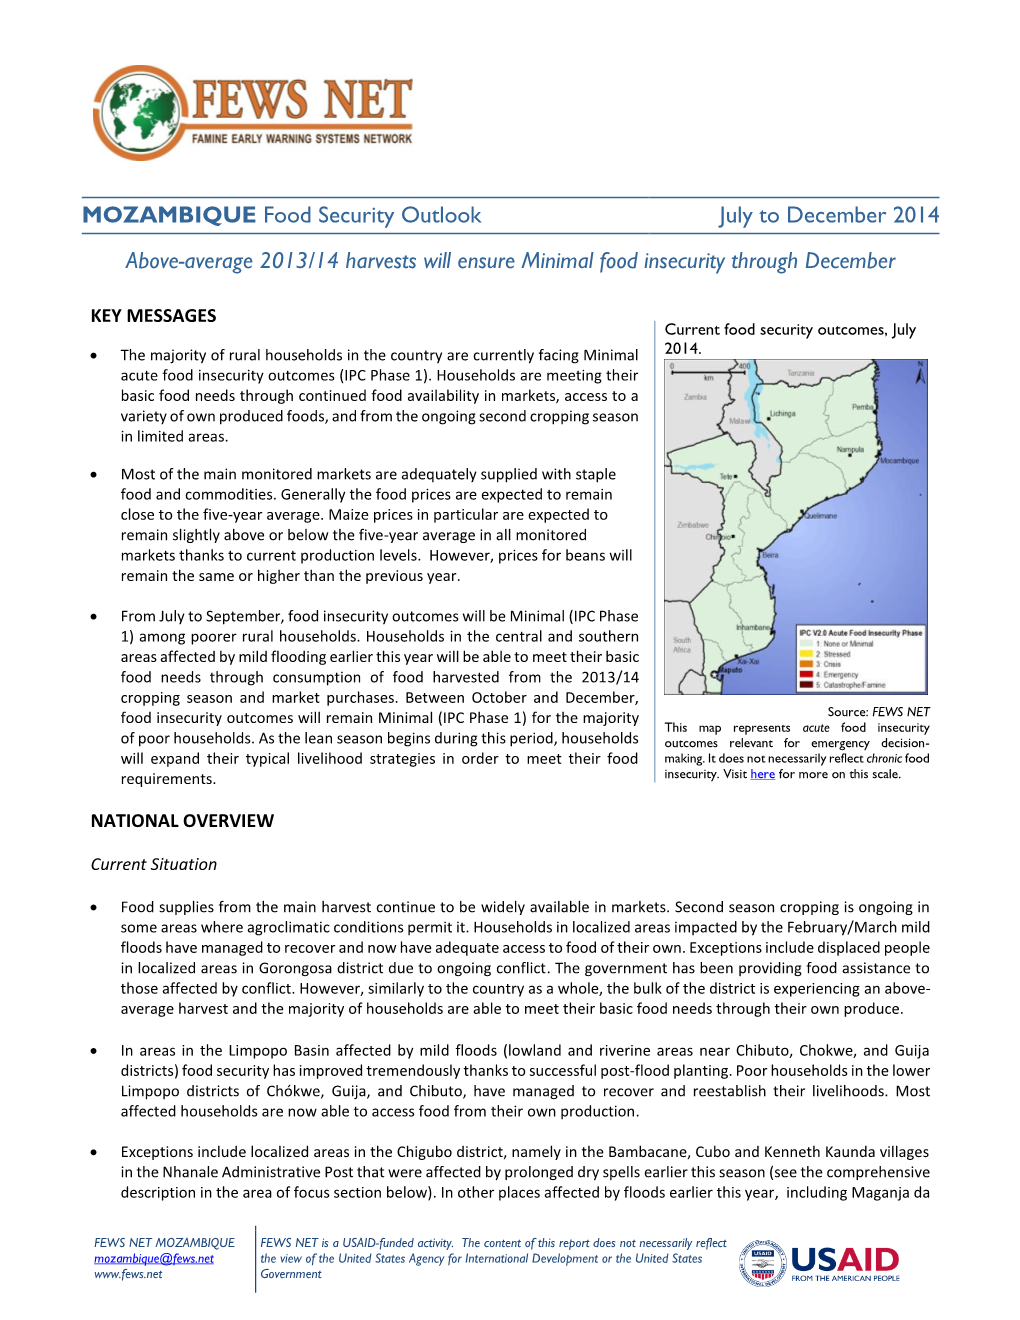 Mozambique Food Security Outlook, July to December 2014